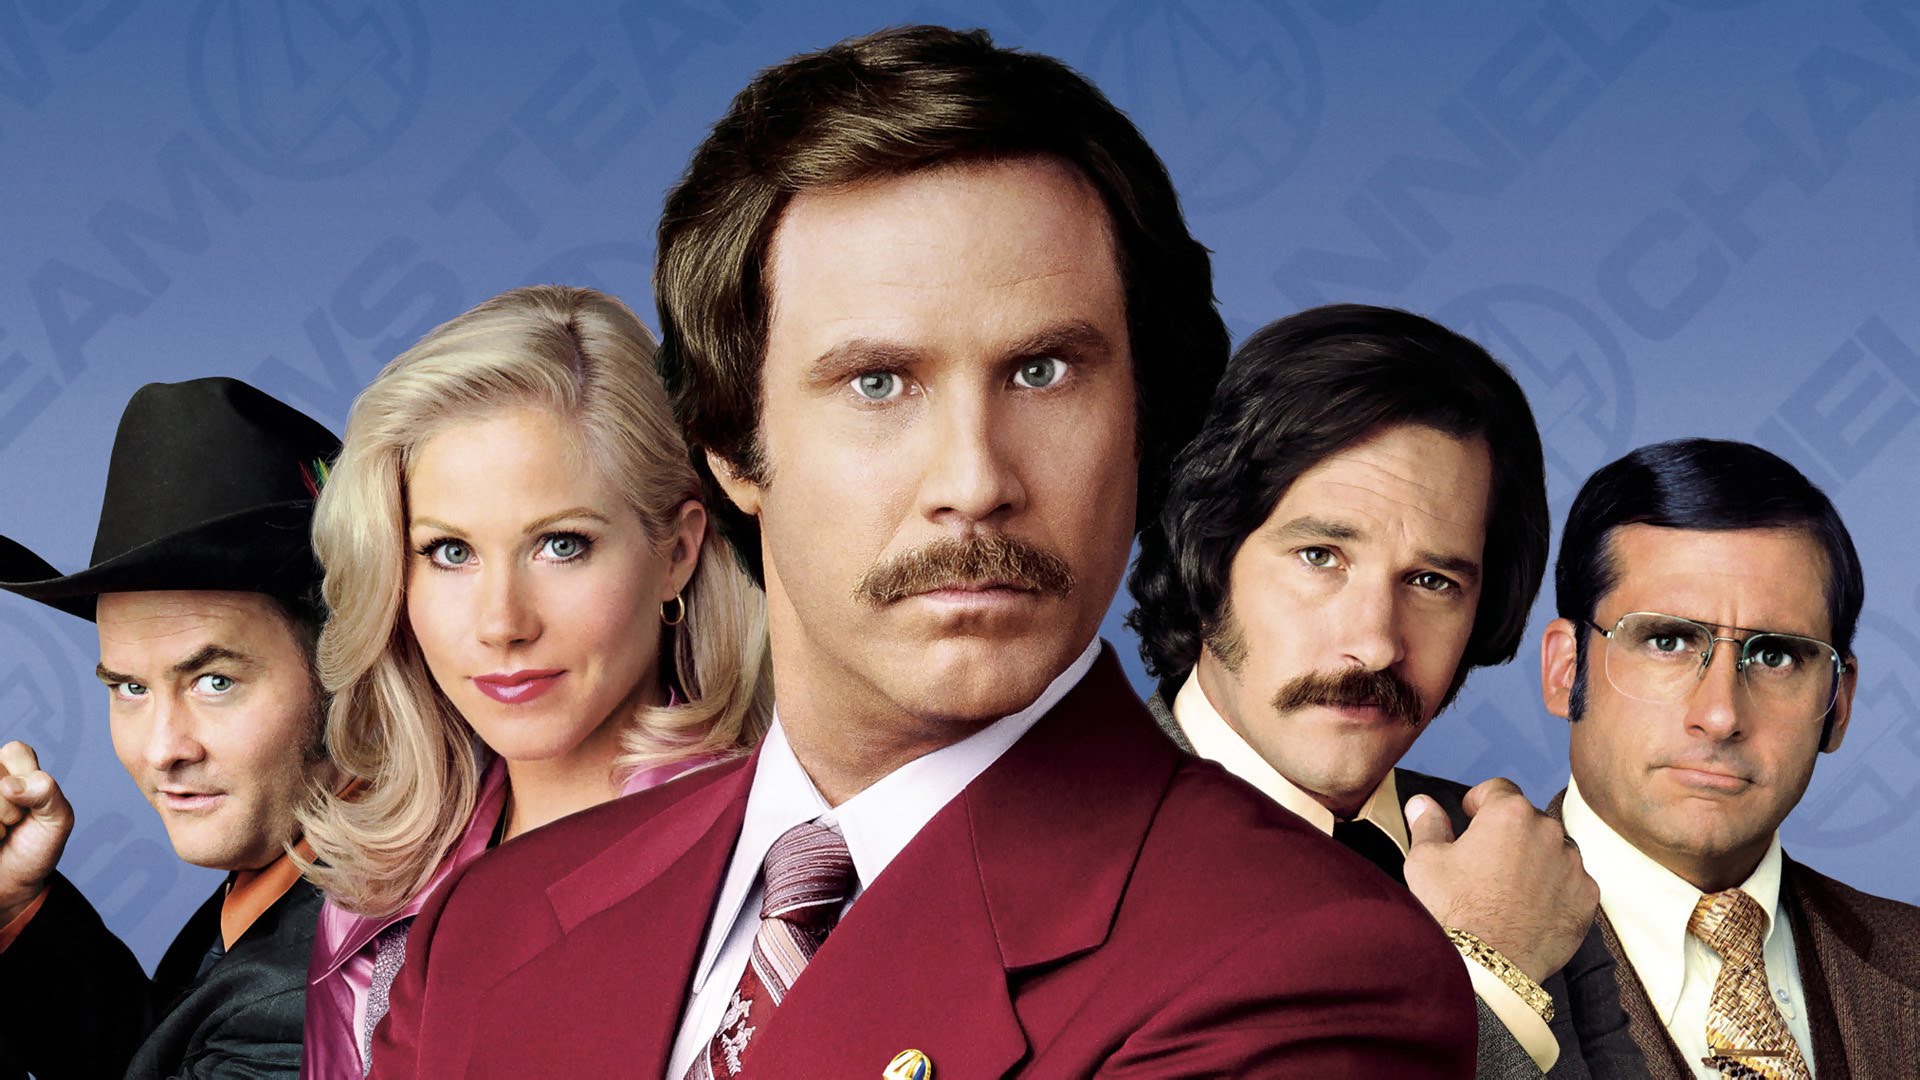 Anchorman: The Legend Of Ron Burgundy #7